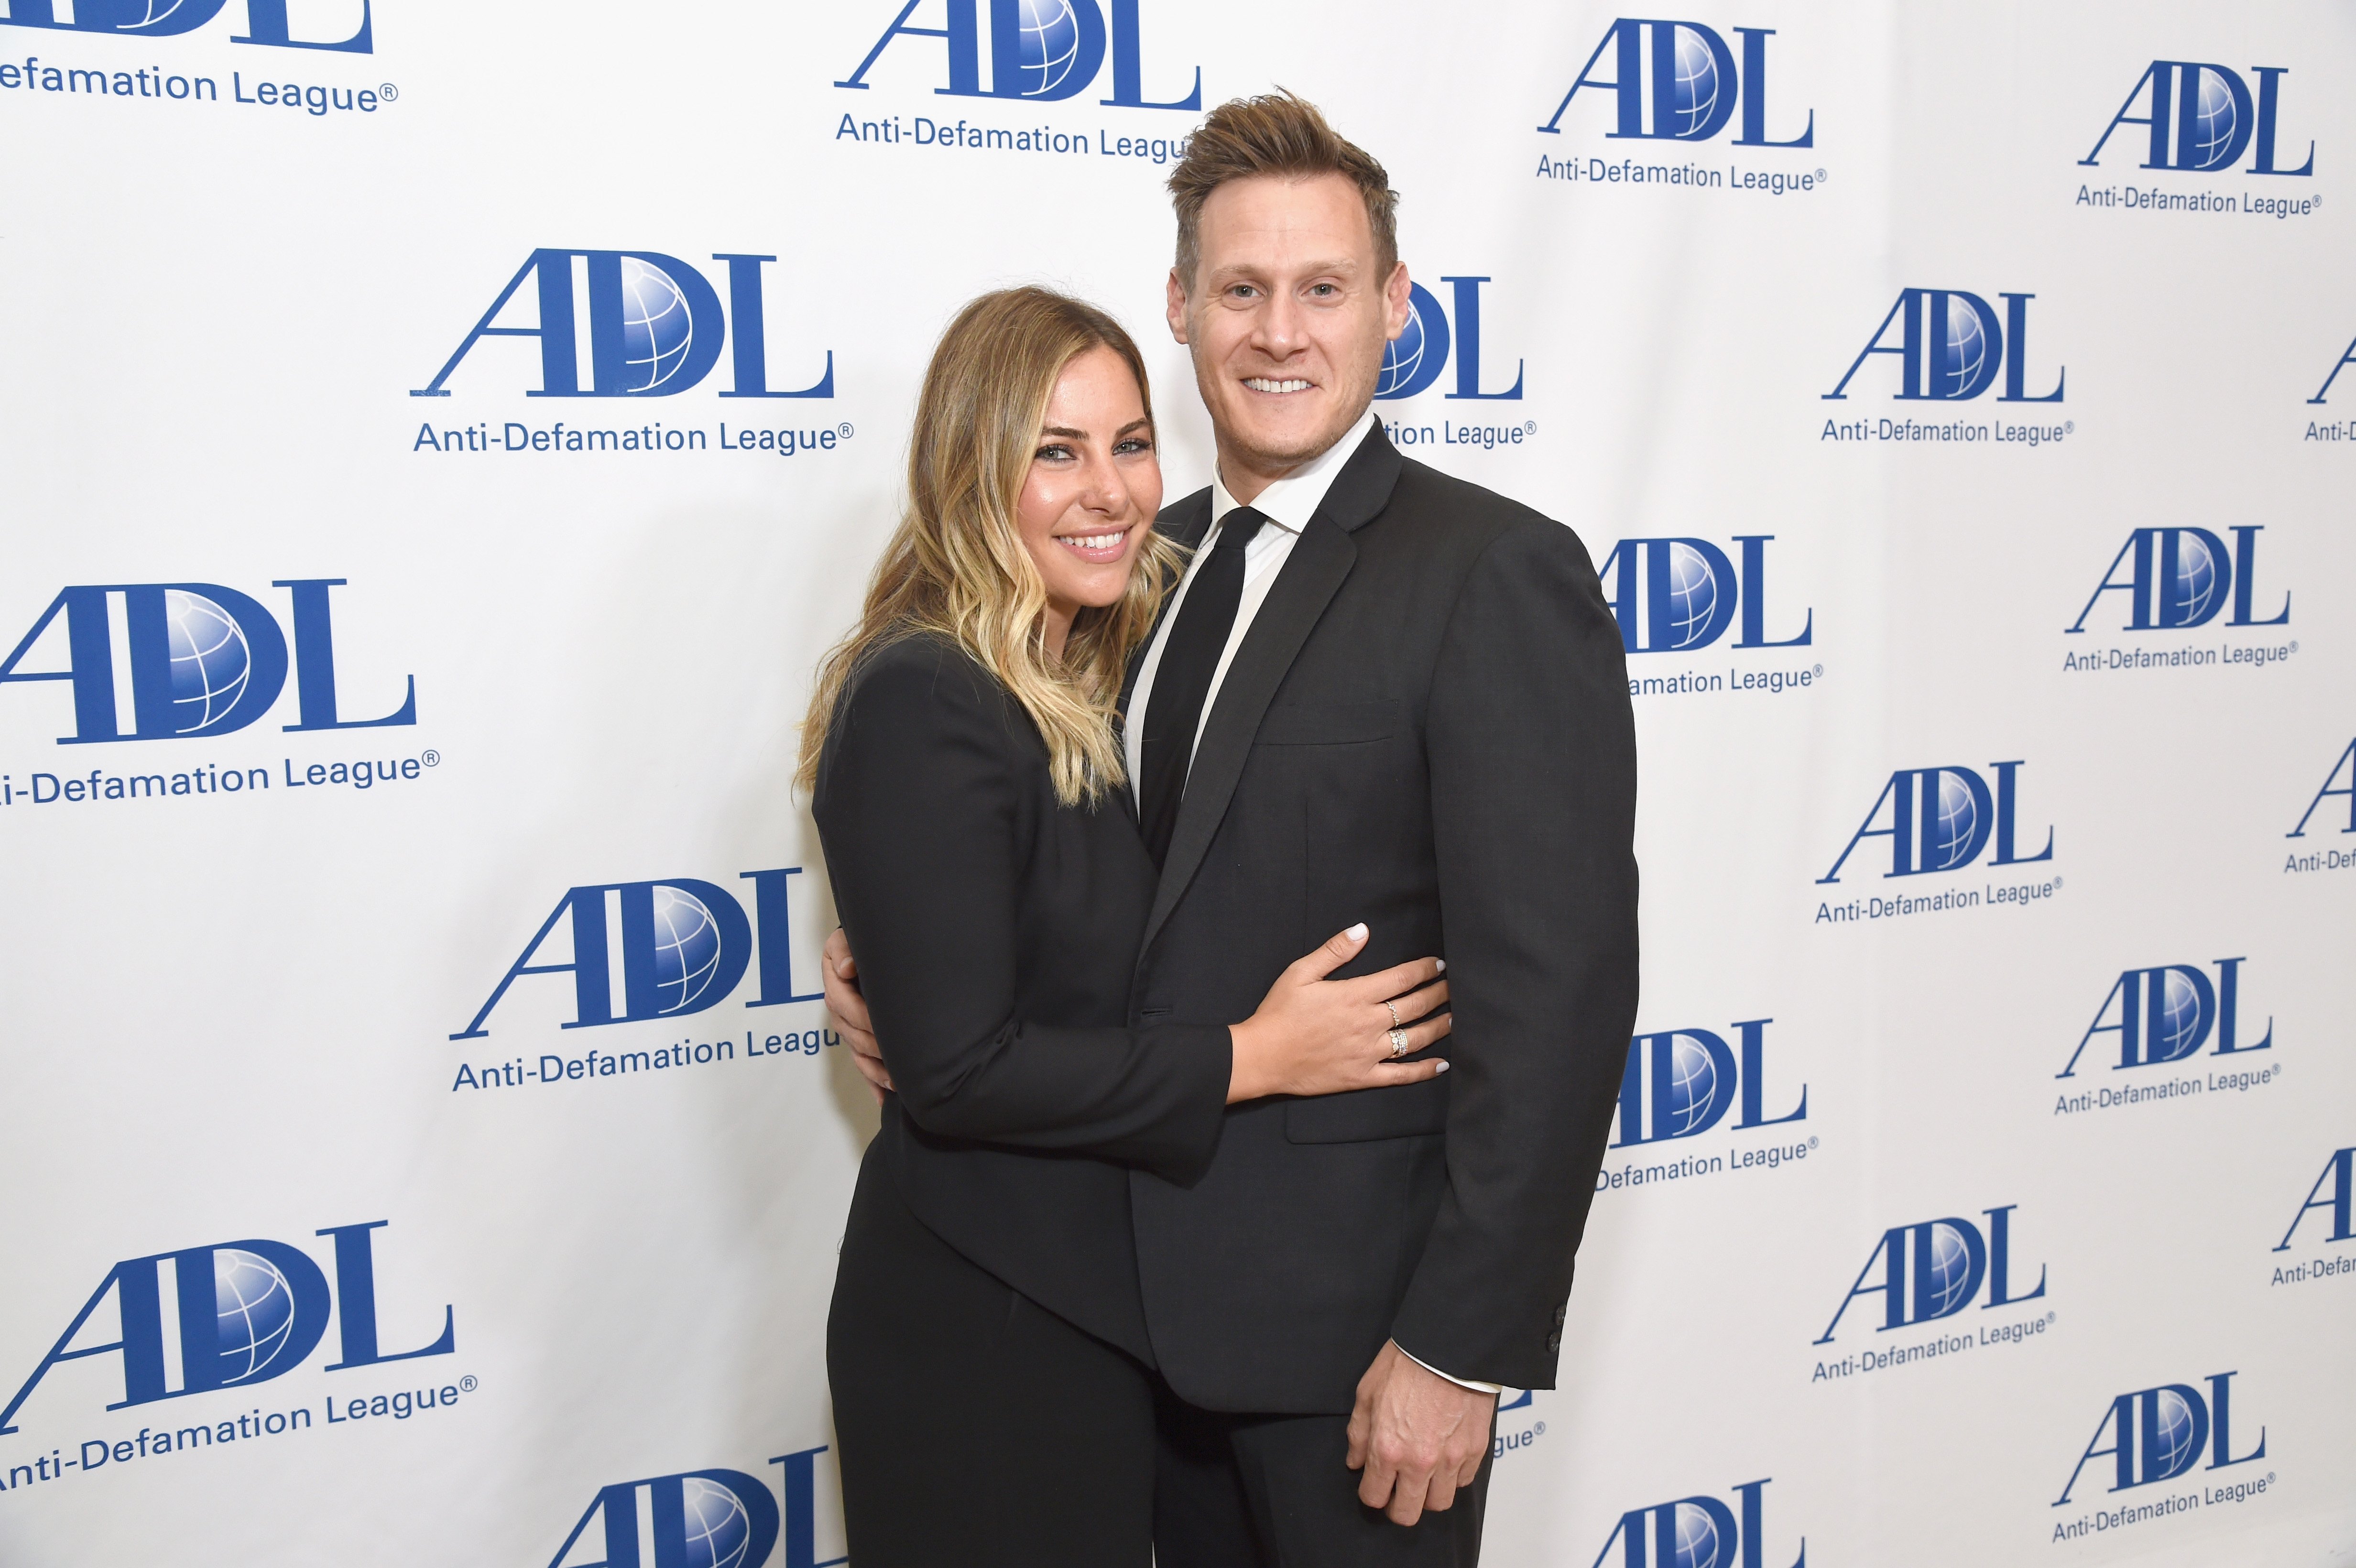 Tracey Kurland and Trevor Engelson at the Anti-Defamation League Entertainment Industry Dinner on April 17, 2018, in Beverly Hills, California. | Source: Getty Images